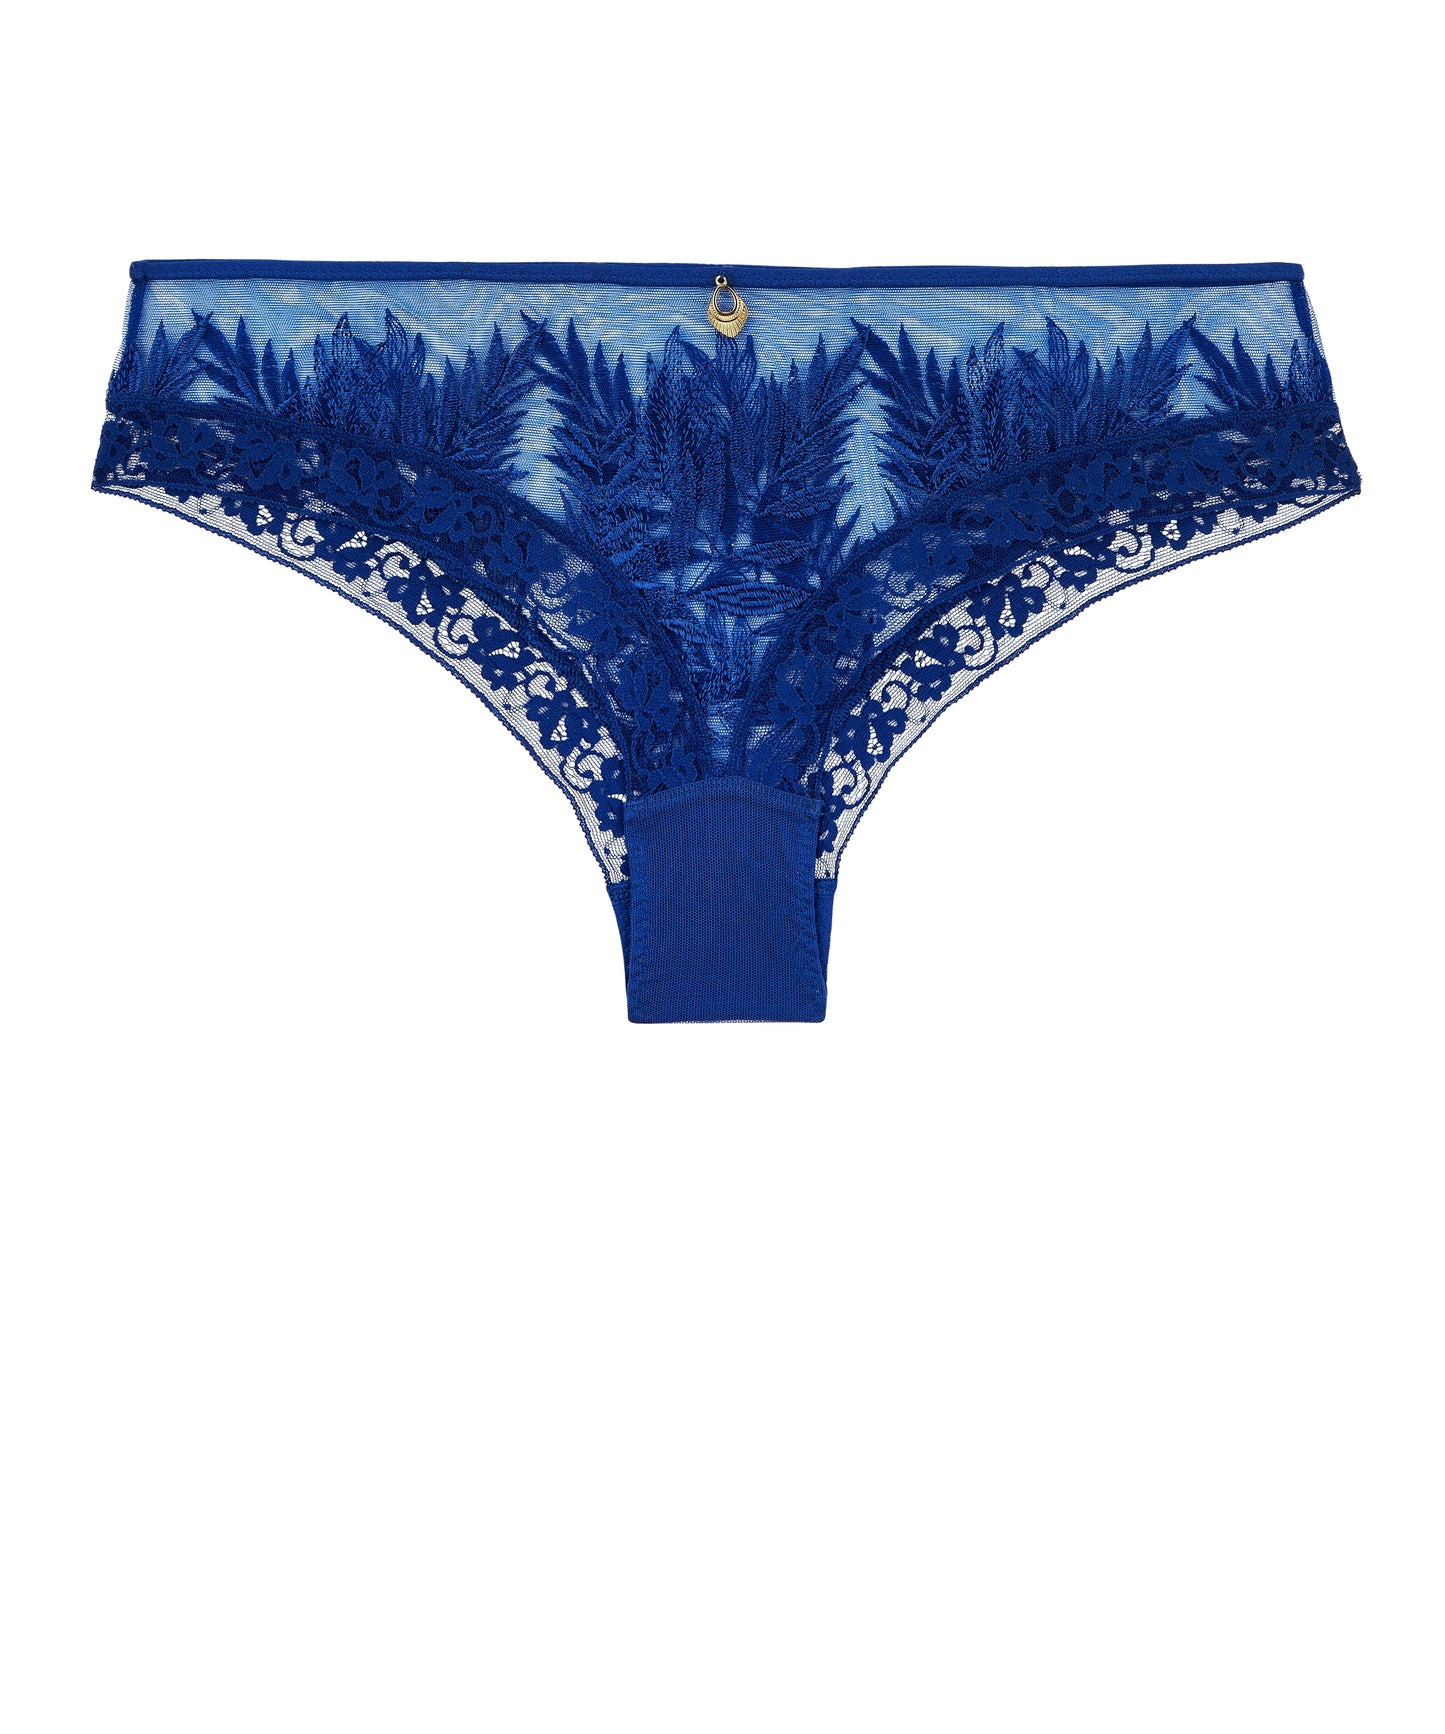 Parenthèse Tropicale Shorty/Hipster in Electric Blue By Aubade - S-XXL